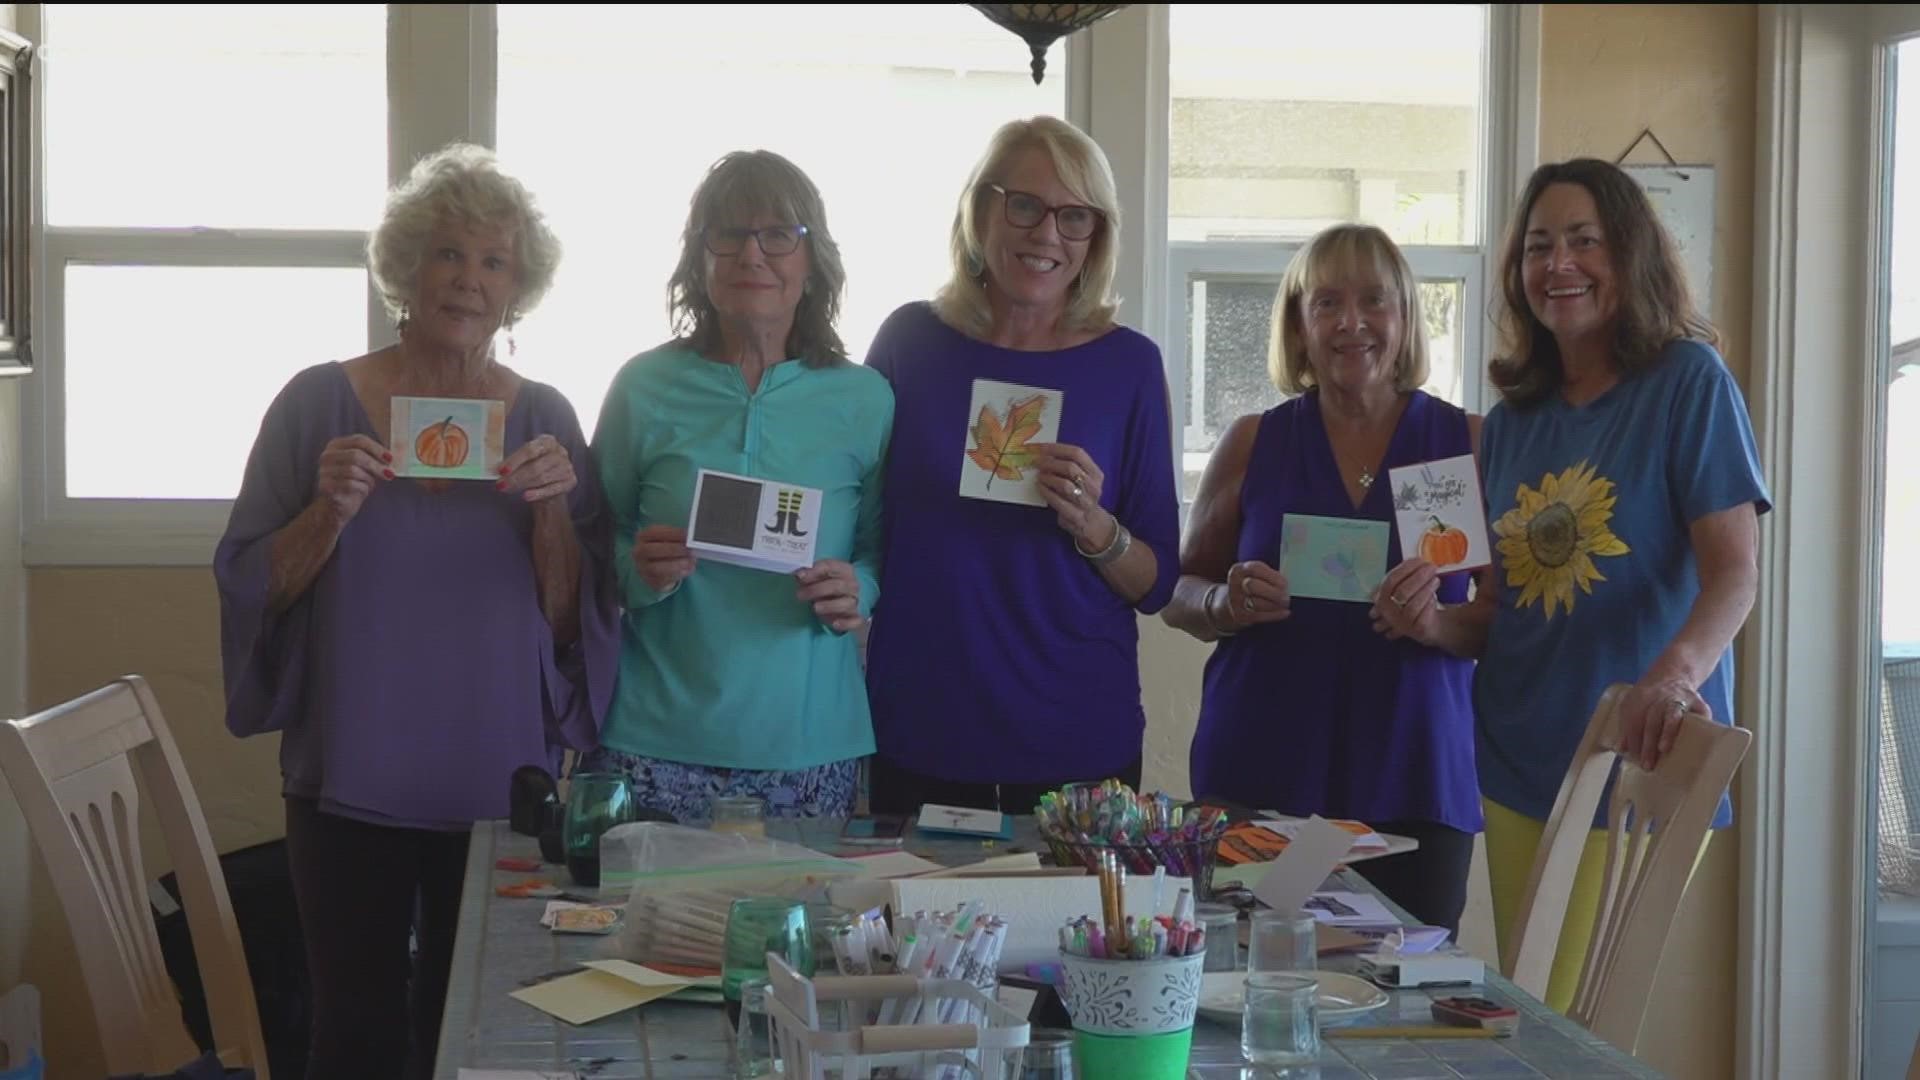 The Cardonistas meet each week to hand-paint greeting cards so domestic violence survivors have a way to write messages.